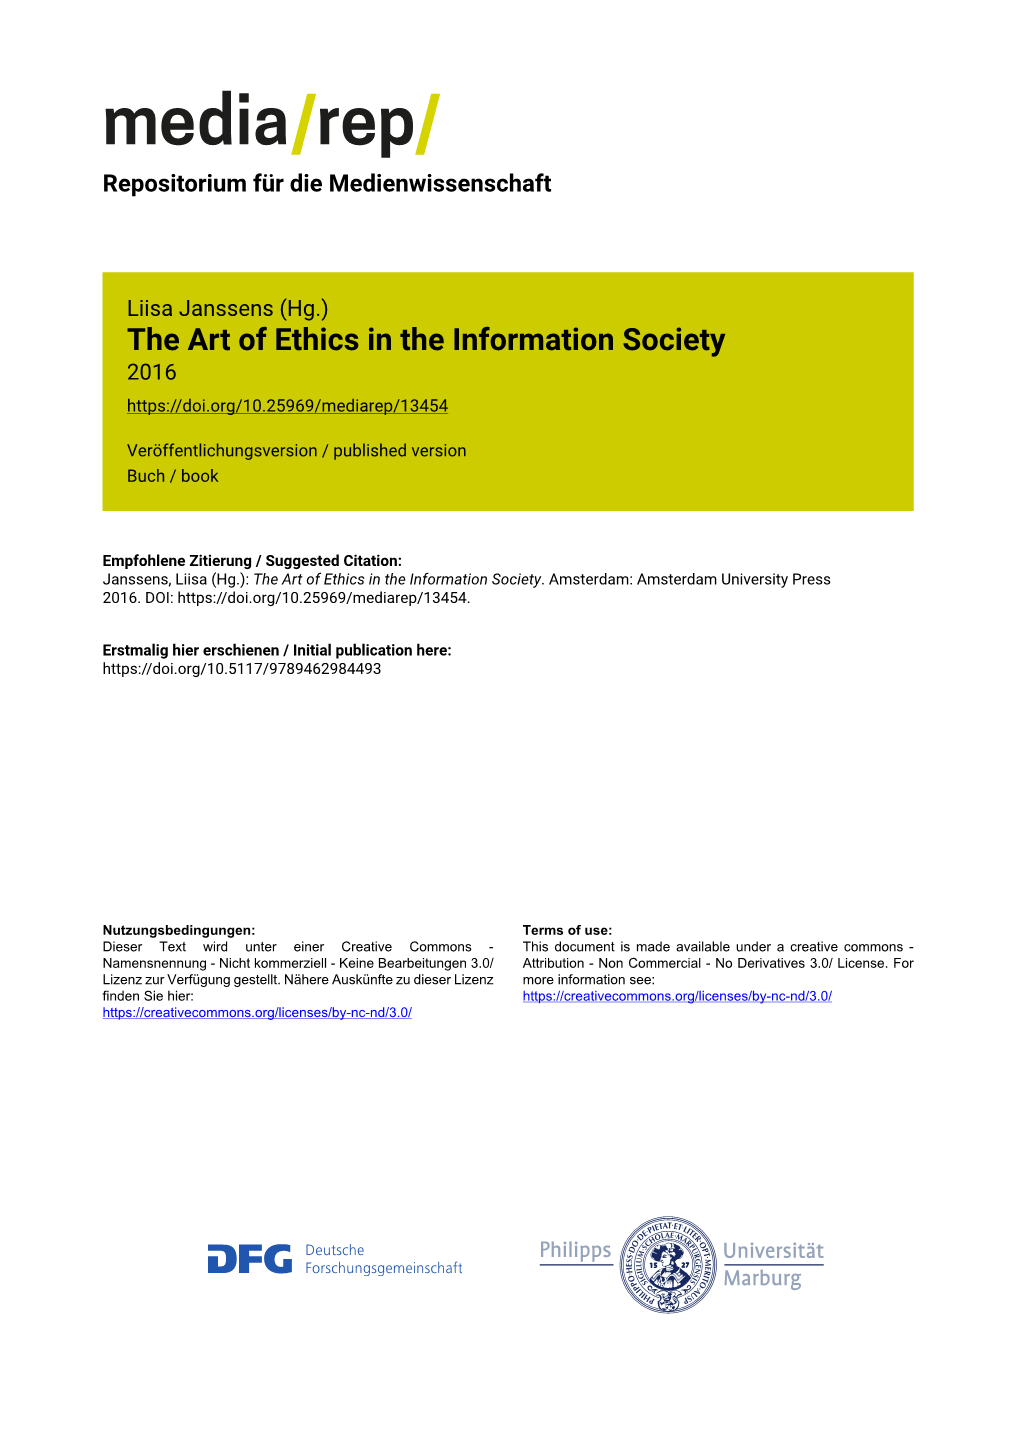 The Art of Ethics in the Information Society 2016